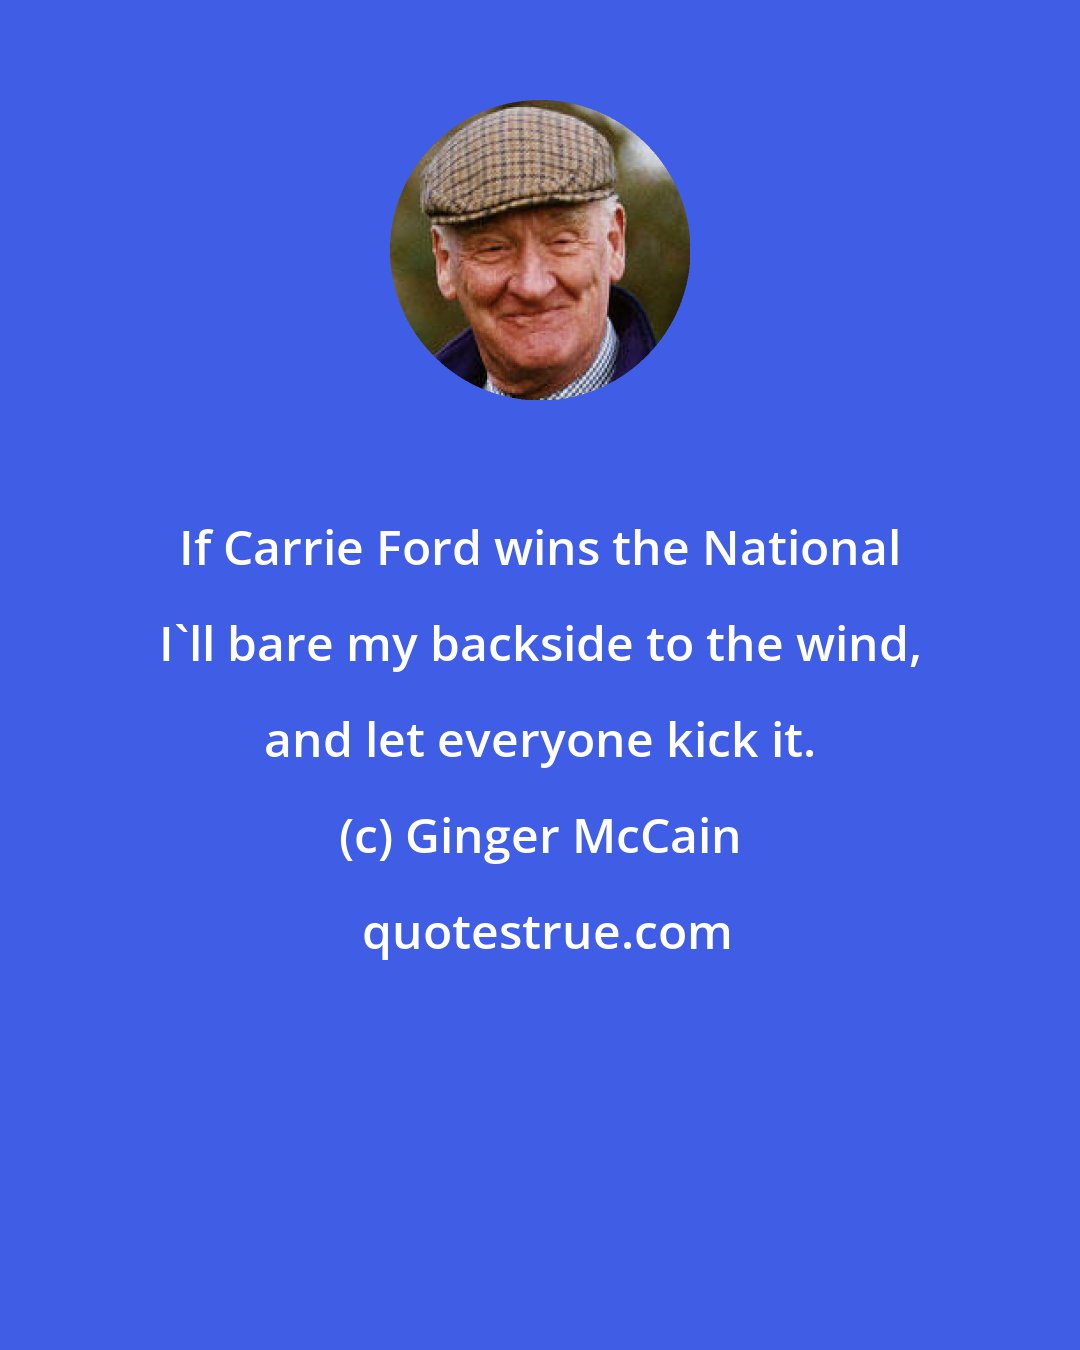 Ginger McCain: If Carrie Ford wins the National I'll bare my backside to the wind, and let everyone kick it.